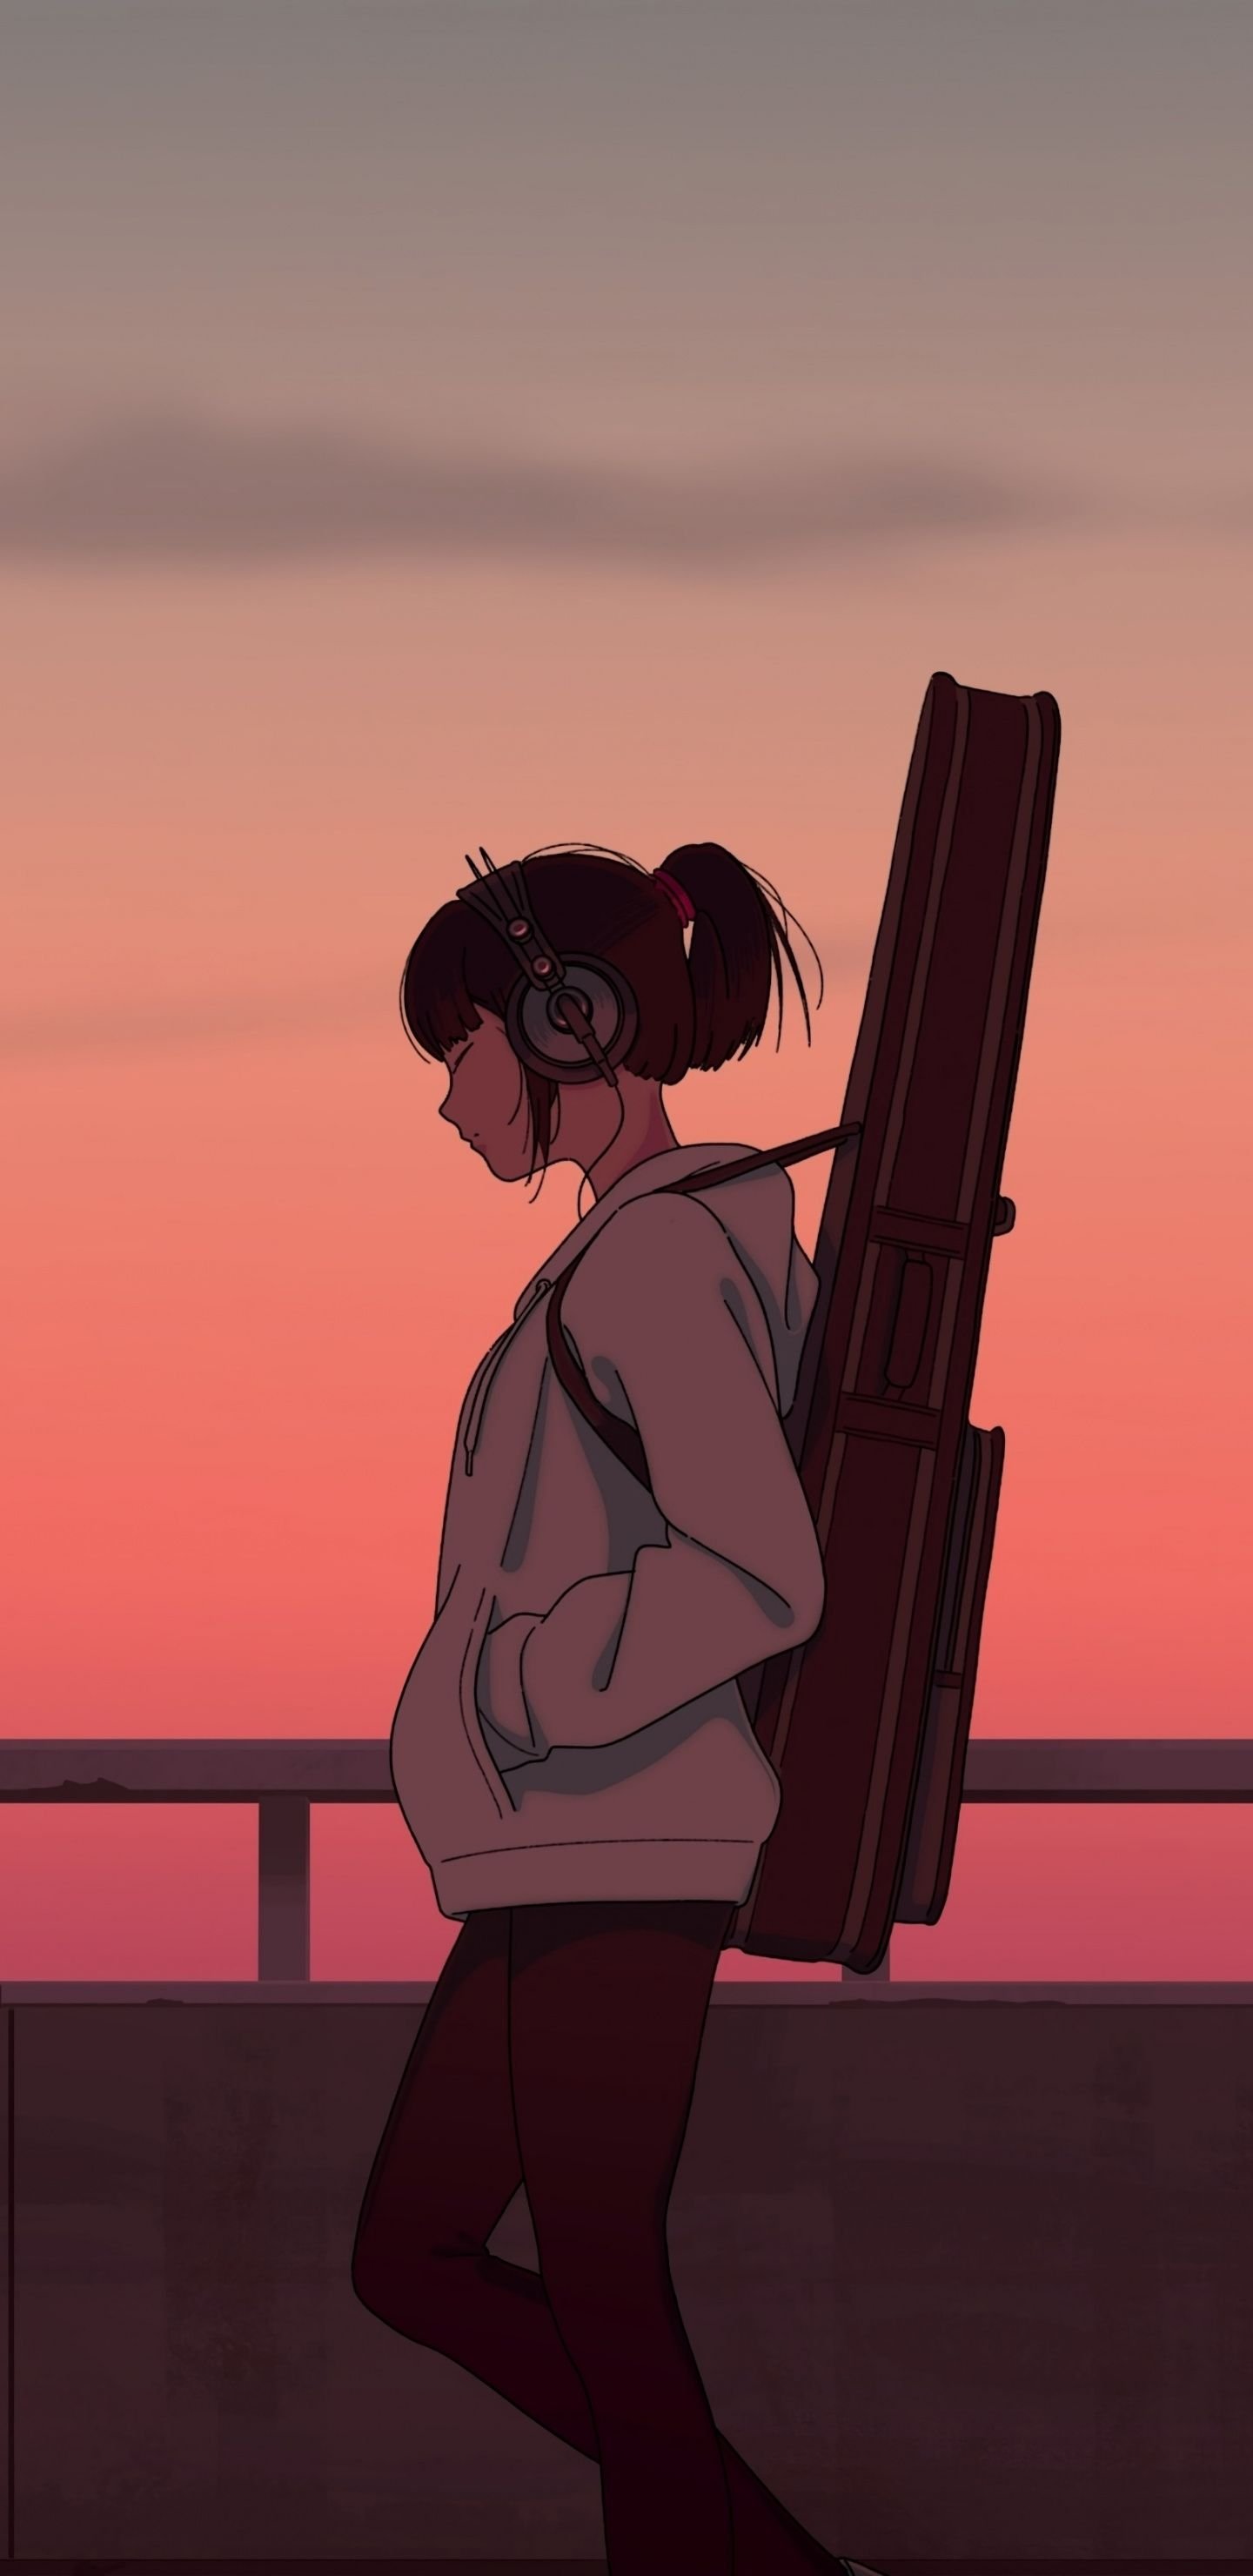 Download Sunset Anime Girl Aesthetic With Guitar Wallpaper | Wallpapers.com